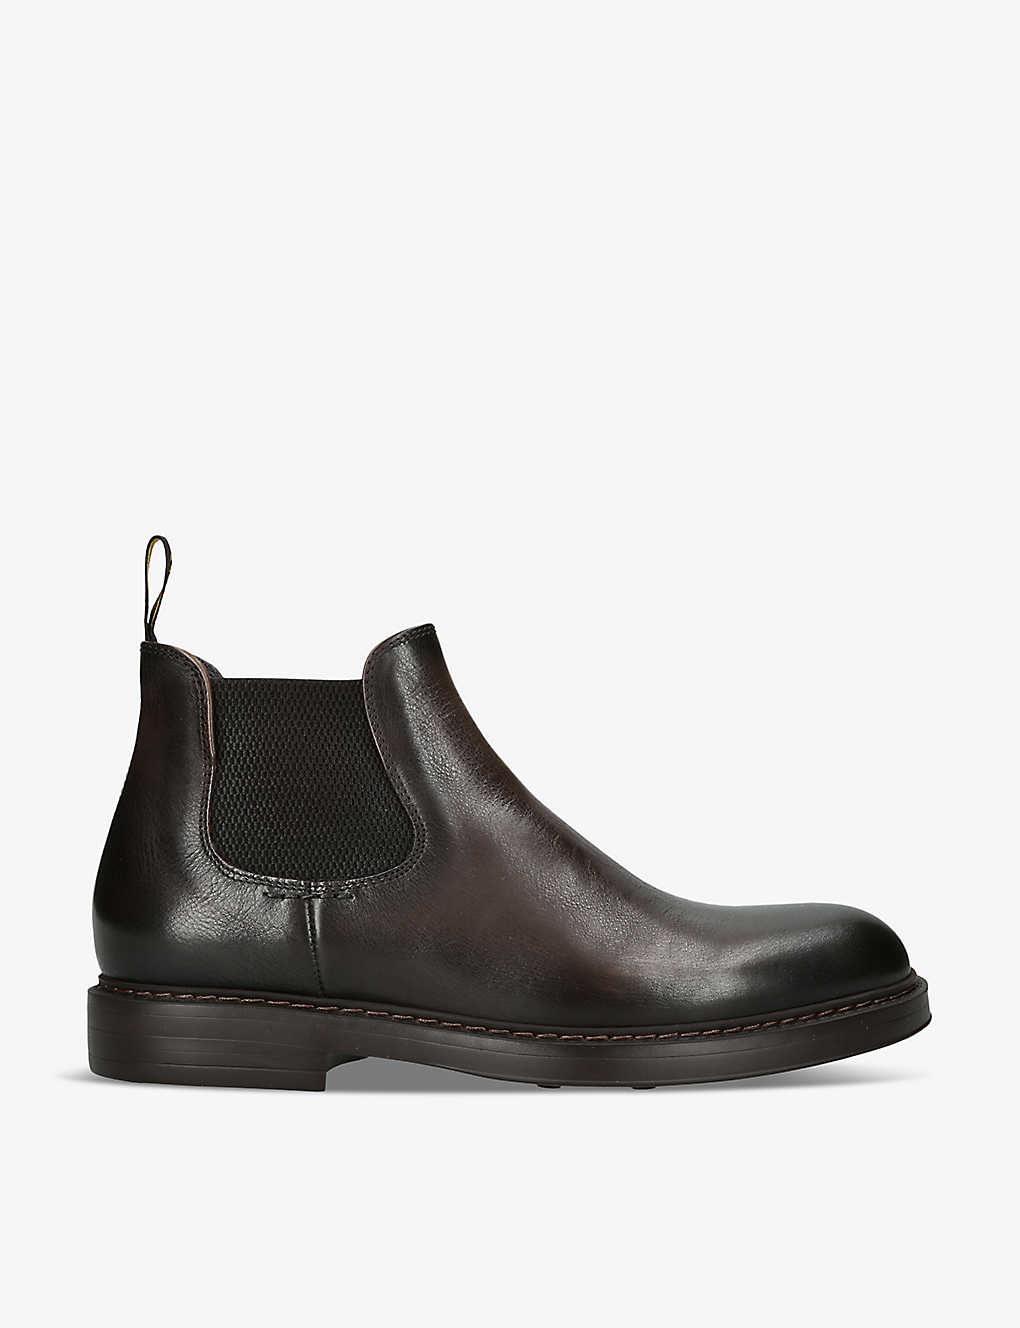 Doucal's Doucals Mens Dark Brown Low-top Leather Chelsea Boots